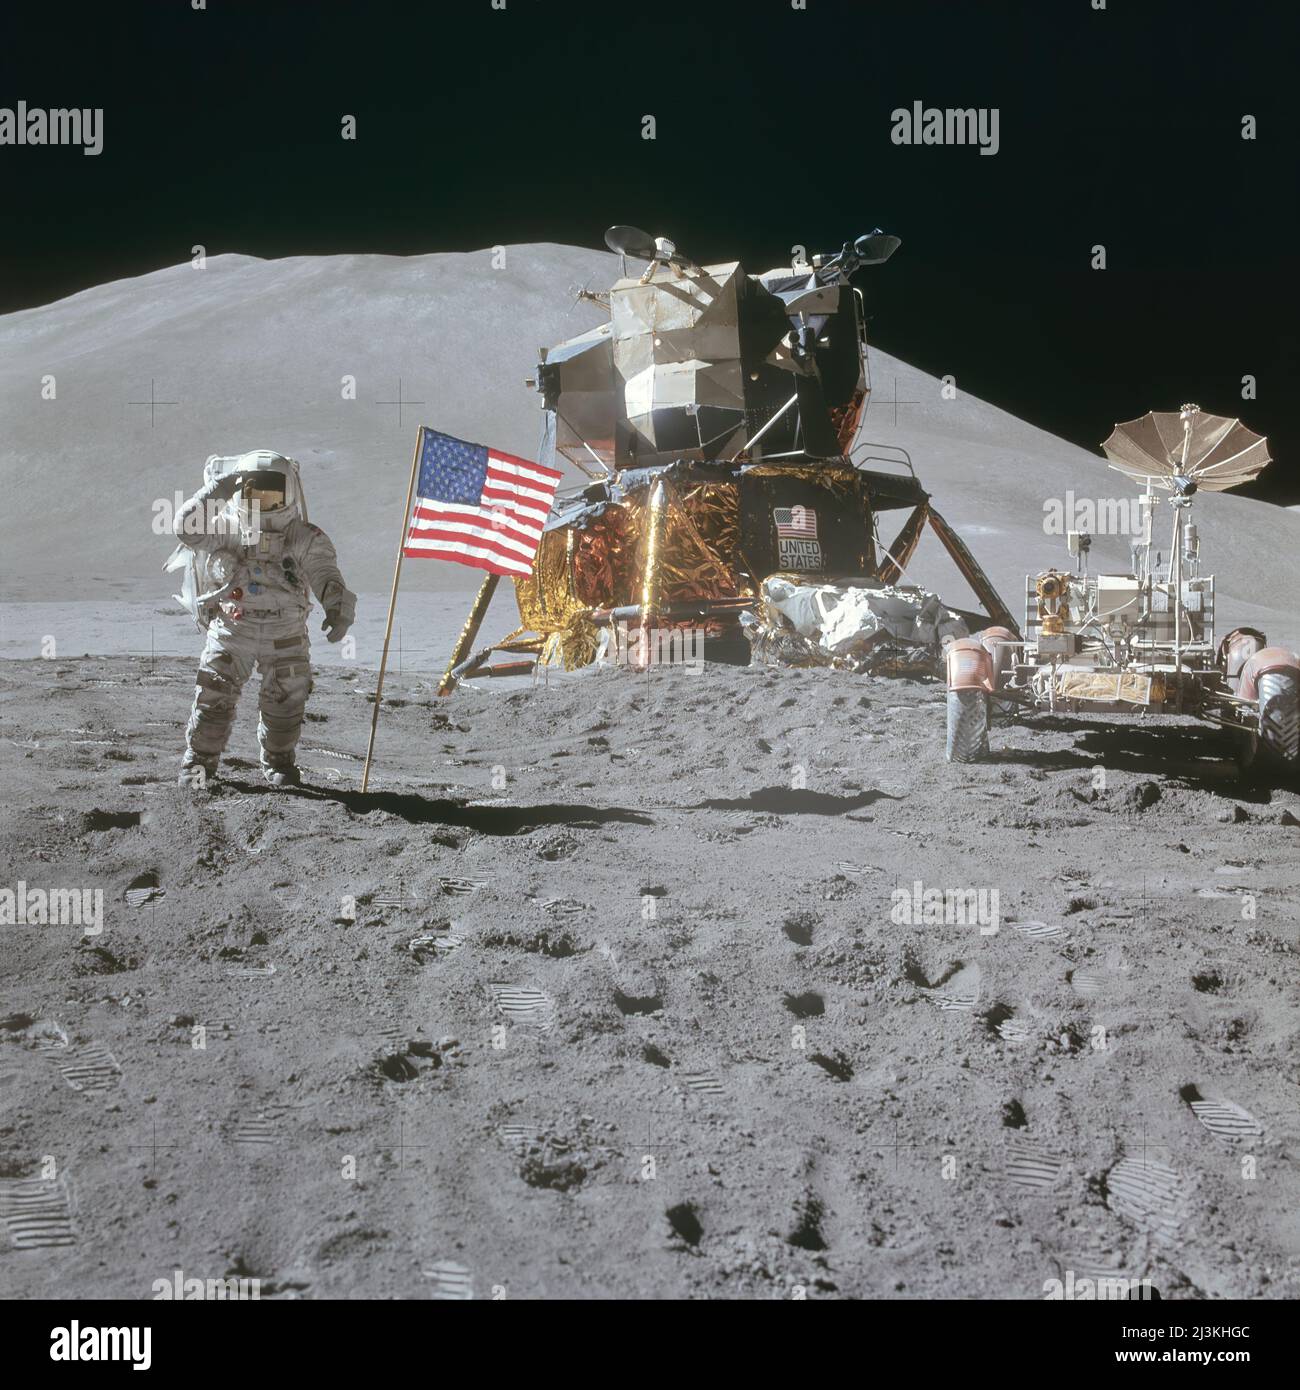 Astronaut James Irwin, lunar module pilot, saluting American flag during the Apollo 15 lunar surface extravehicular activity (EVA) at the Hadley-Apennine landing site. The Lunar Module (LM) 'Falcon' is in the center. On the right is the Lunar Roving Vehicle (LRV). The mountain Hadley Delta in the background rises approximately 4,000 meters (about 13,124 feet) above the plain. Stock Photo